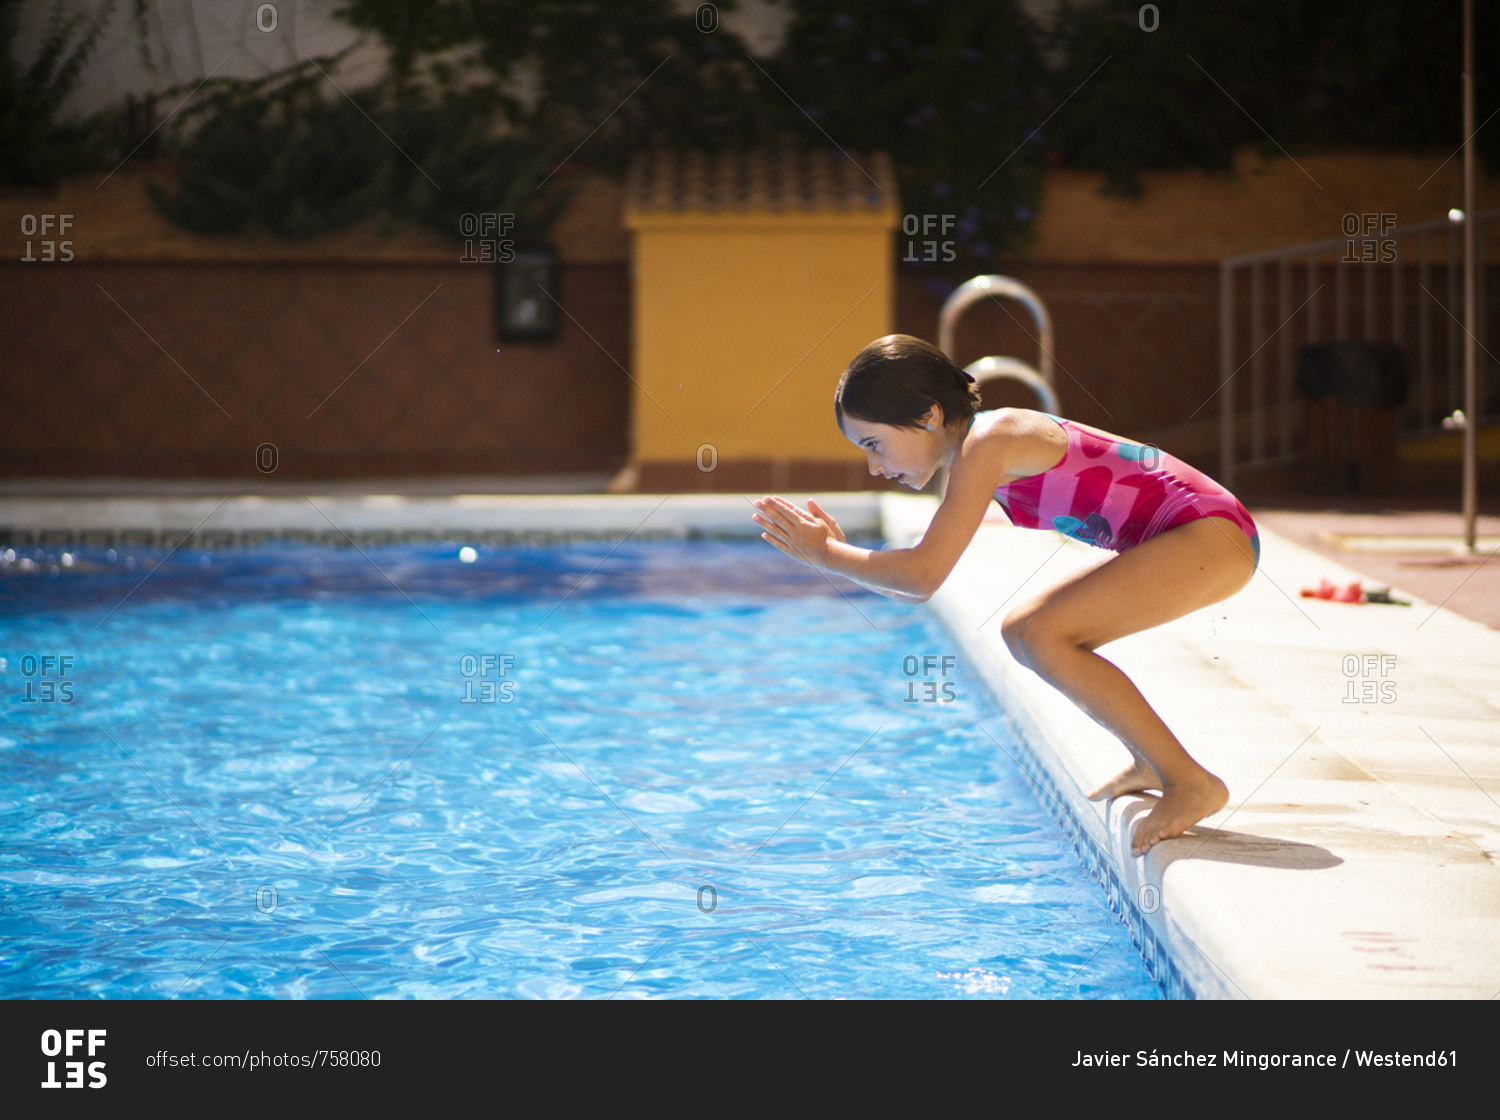 Young girl jumping head first into the pool in summer